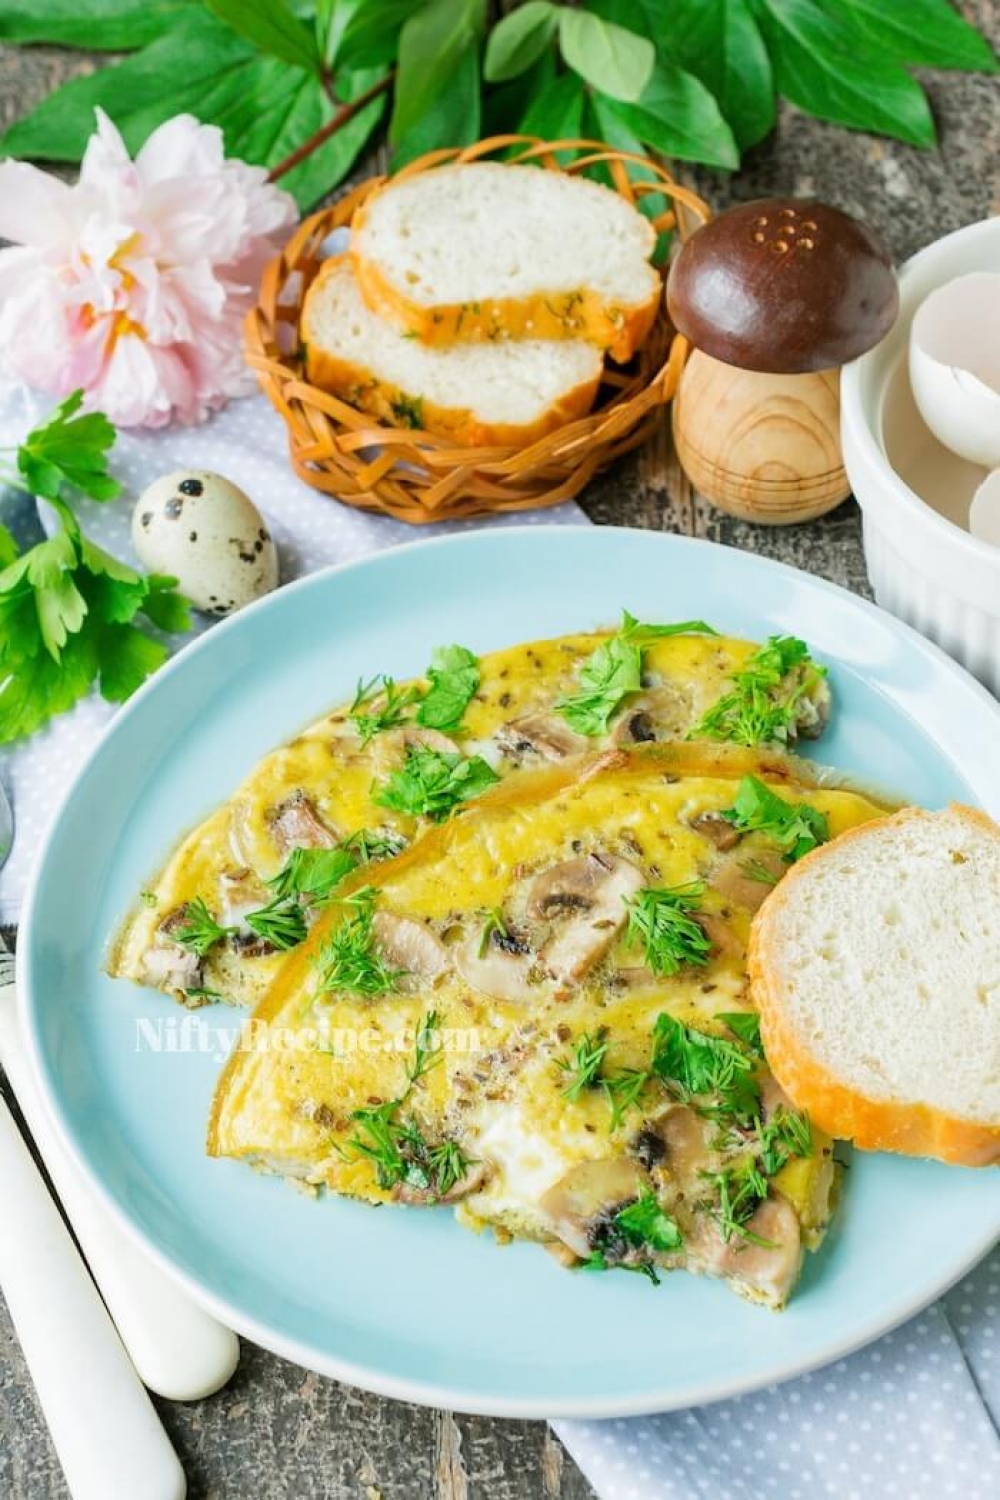 Omelette with Mushrooms